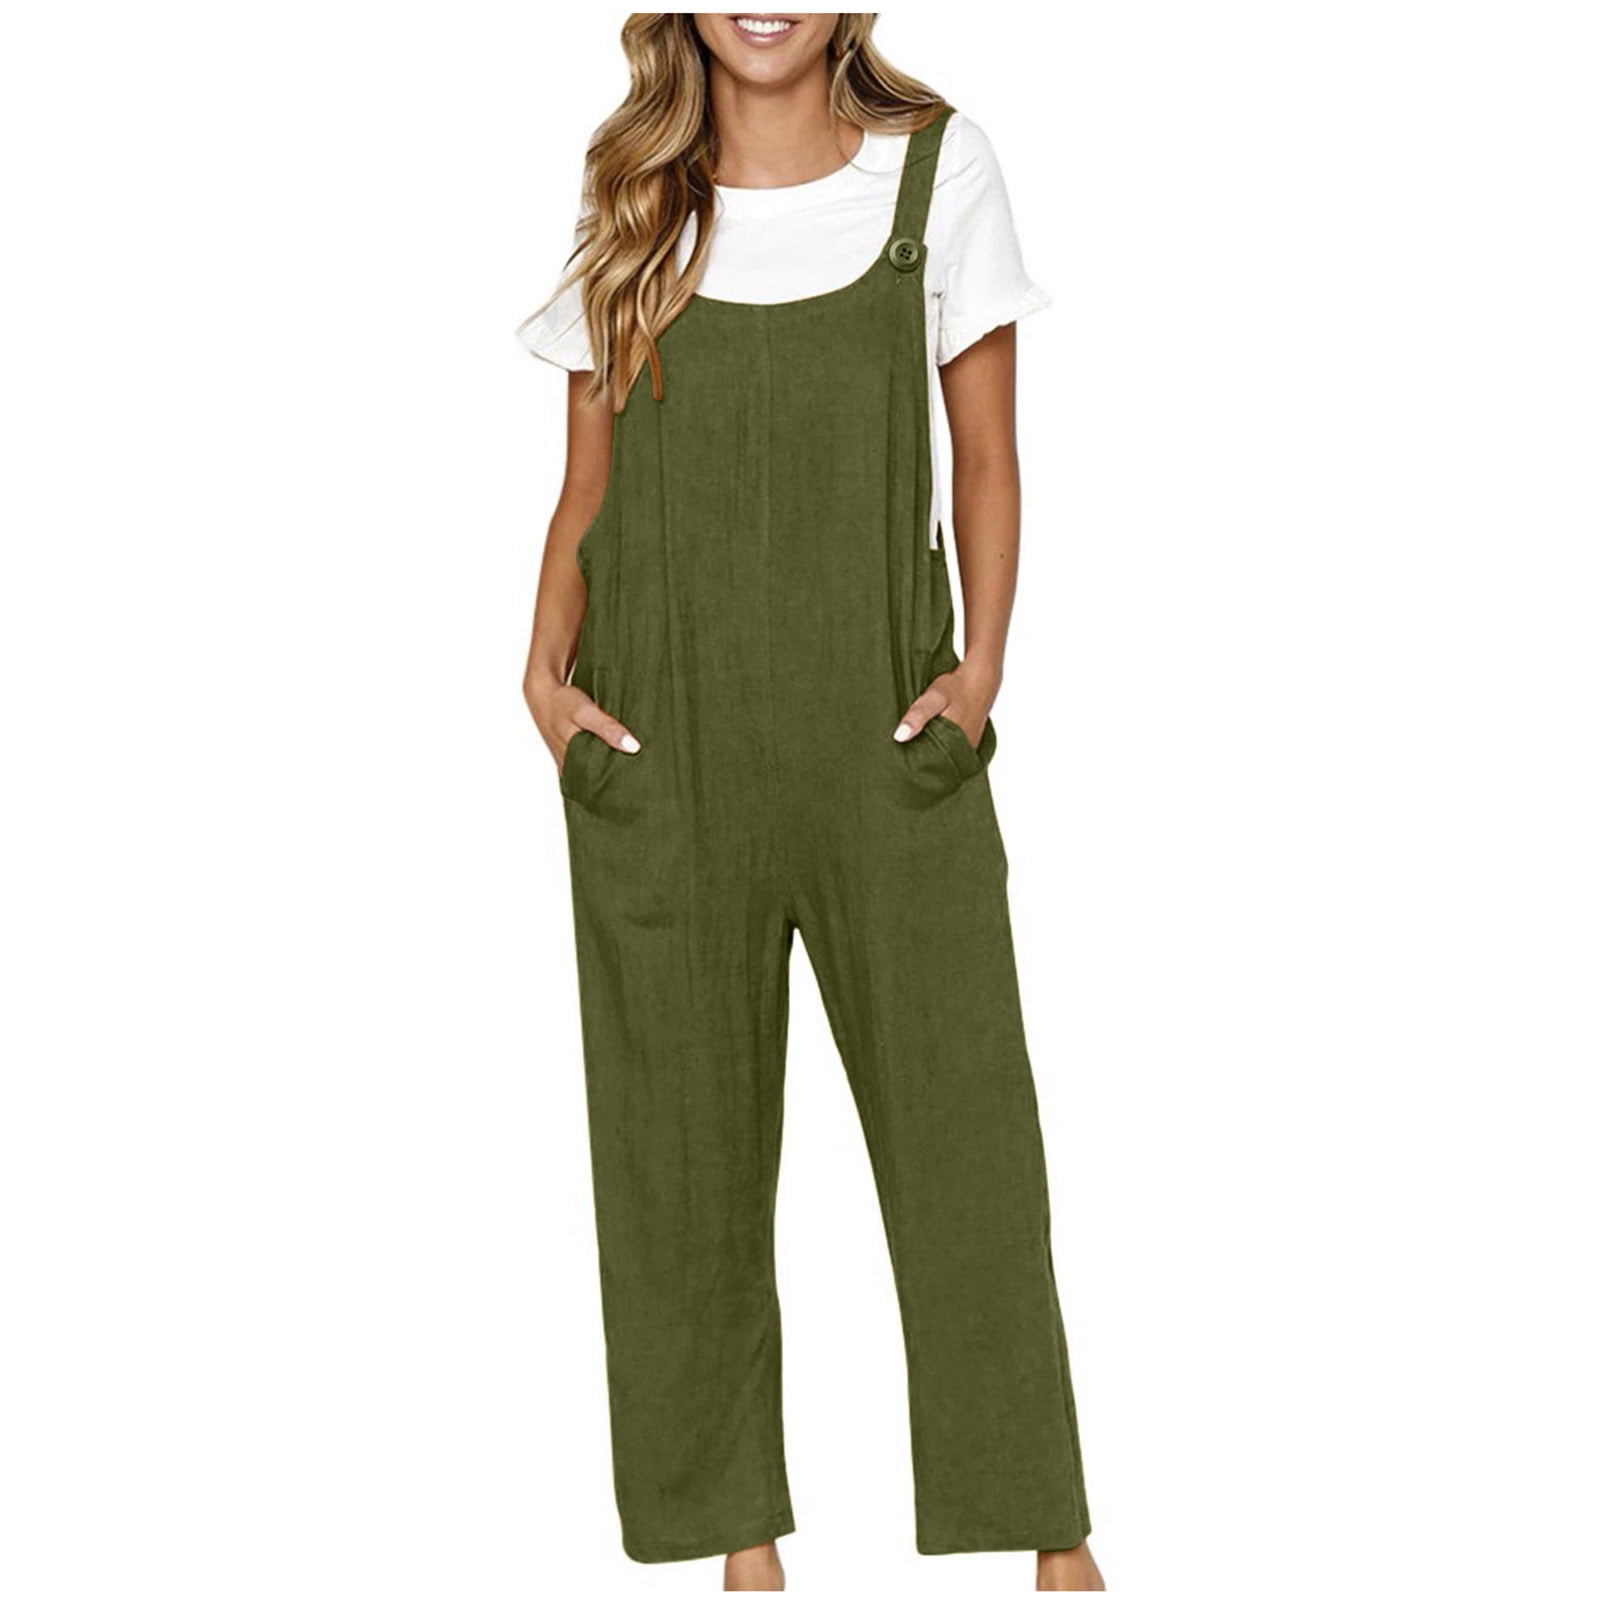 Oversized Jumpsuit Linen Overalls With Pockets Dungarees for Women UK Wide  Leg Stretchy Dungarees Women Casual Sleeveless Romper Women's Loose Baggy  Fashion Playsuit Trousers Cotton And Linen Pants 